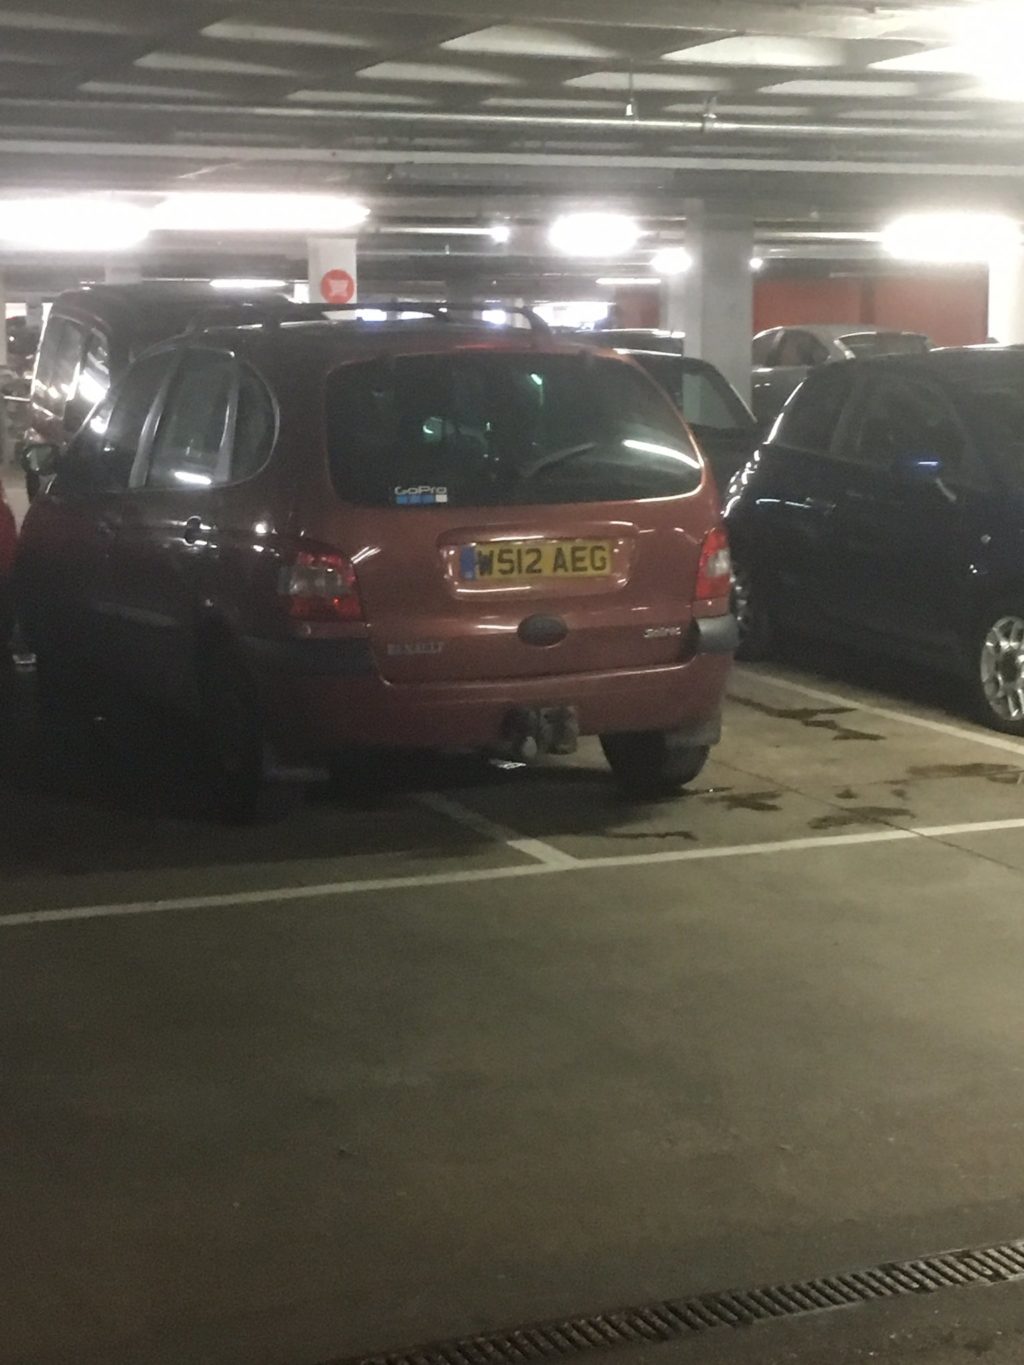 W512 AEG is an Inconsiderate Parker